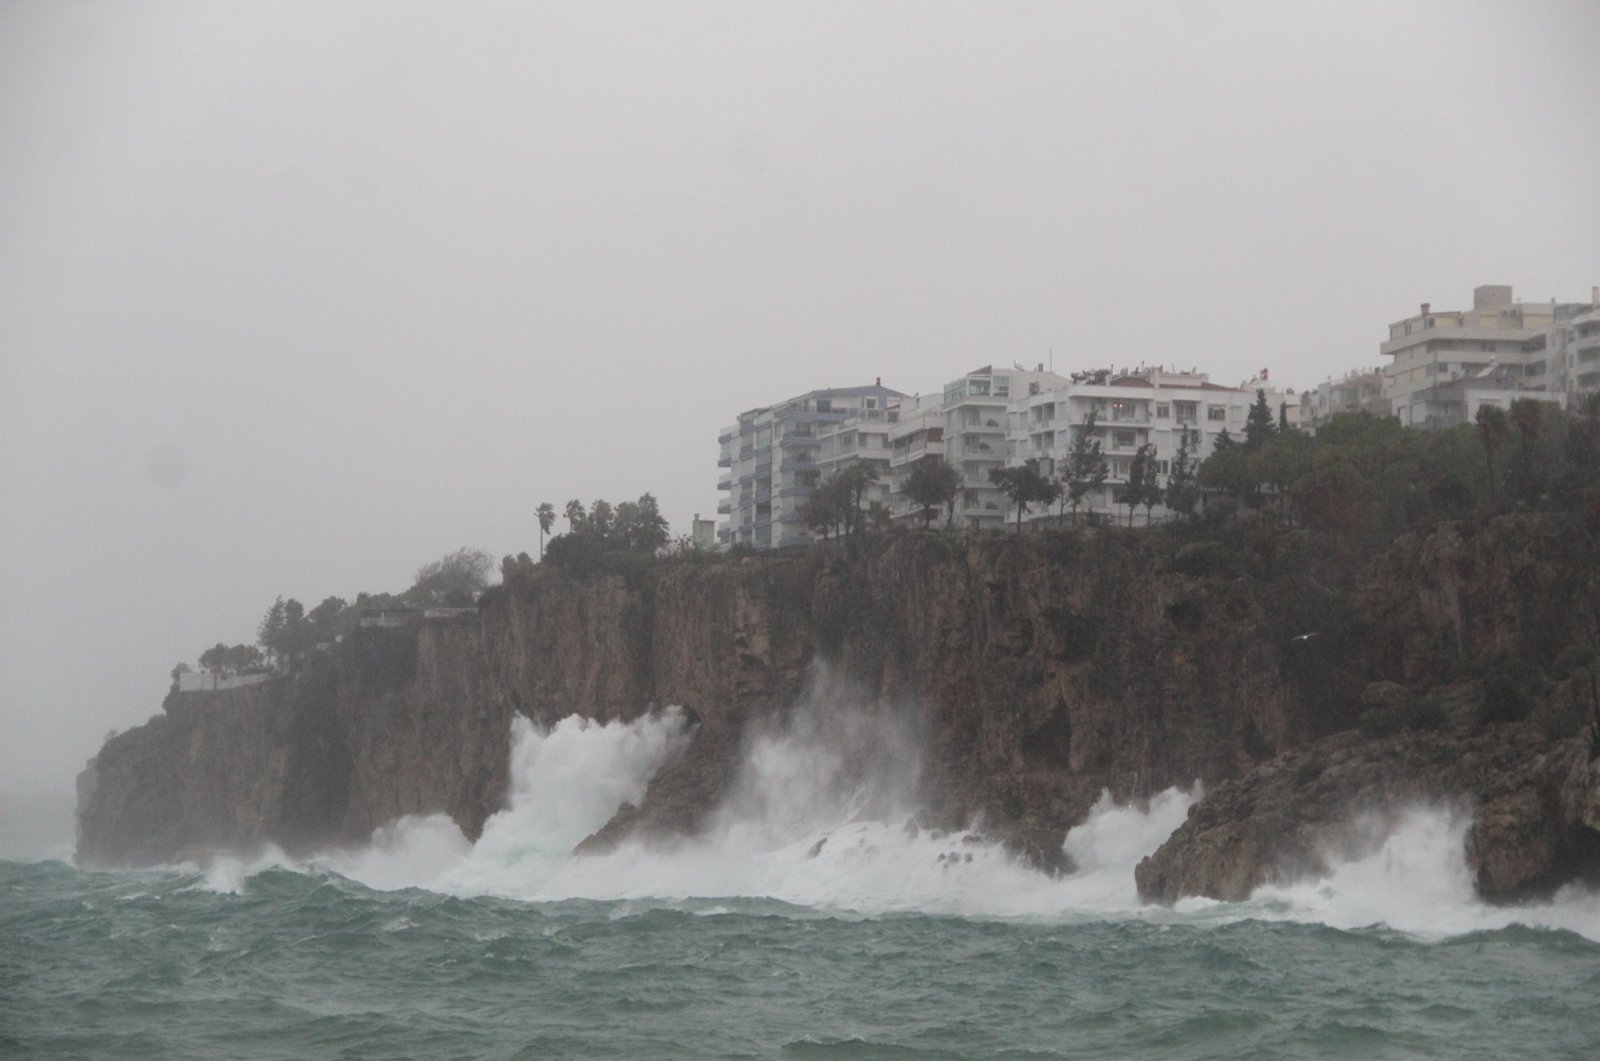 Waves crash into the cliffs of downtown Antalya during a storm, in southern Turkey, Dec. 30, 2021. (IHA Photo)